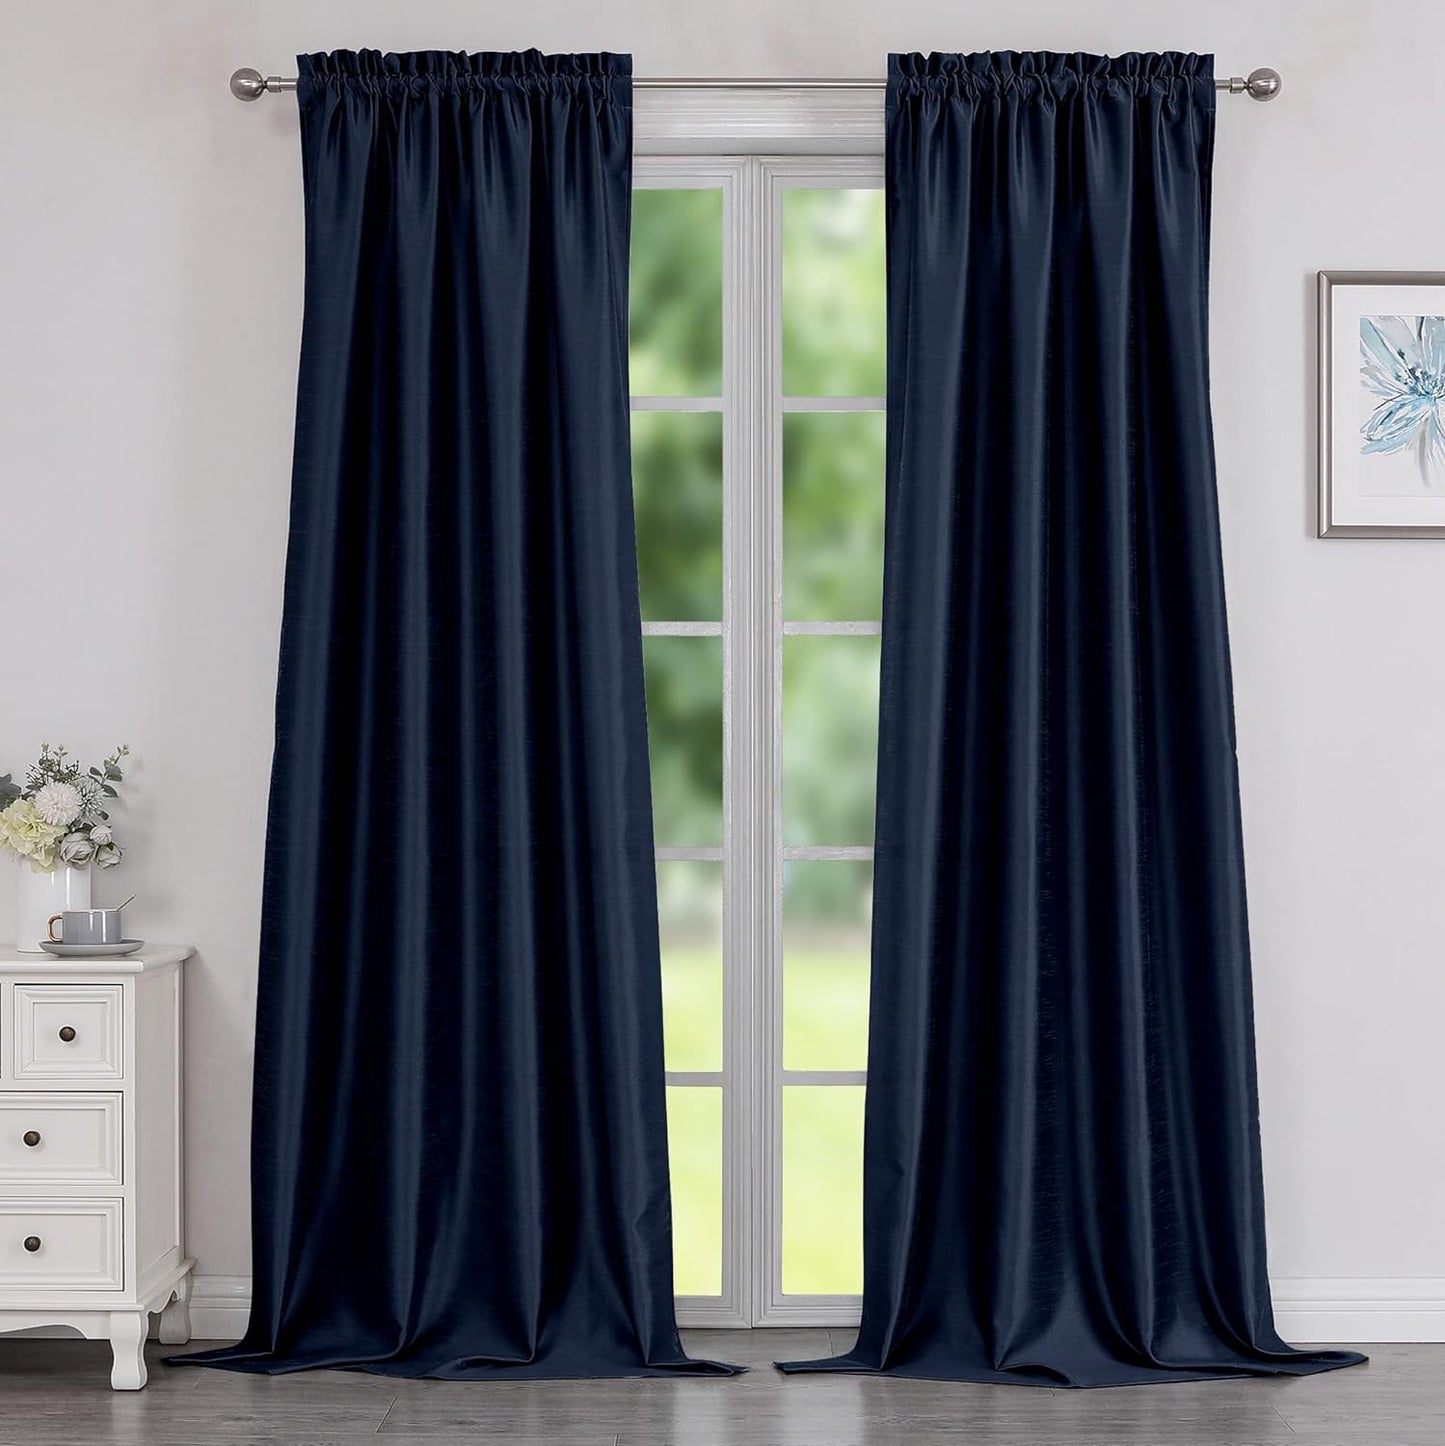 Chyhomenyc Uptown Sage Green Kitchen Curtains 45 Inch Length 2 Panels, Room Darkening Faux Silk Chic Fabric Short Window Curtains for Bedroom Living Room, Each 30Wx45L  Chyhomenyc Navy Blue 2X40"Wx96"L 